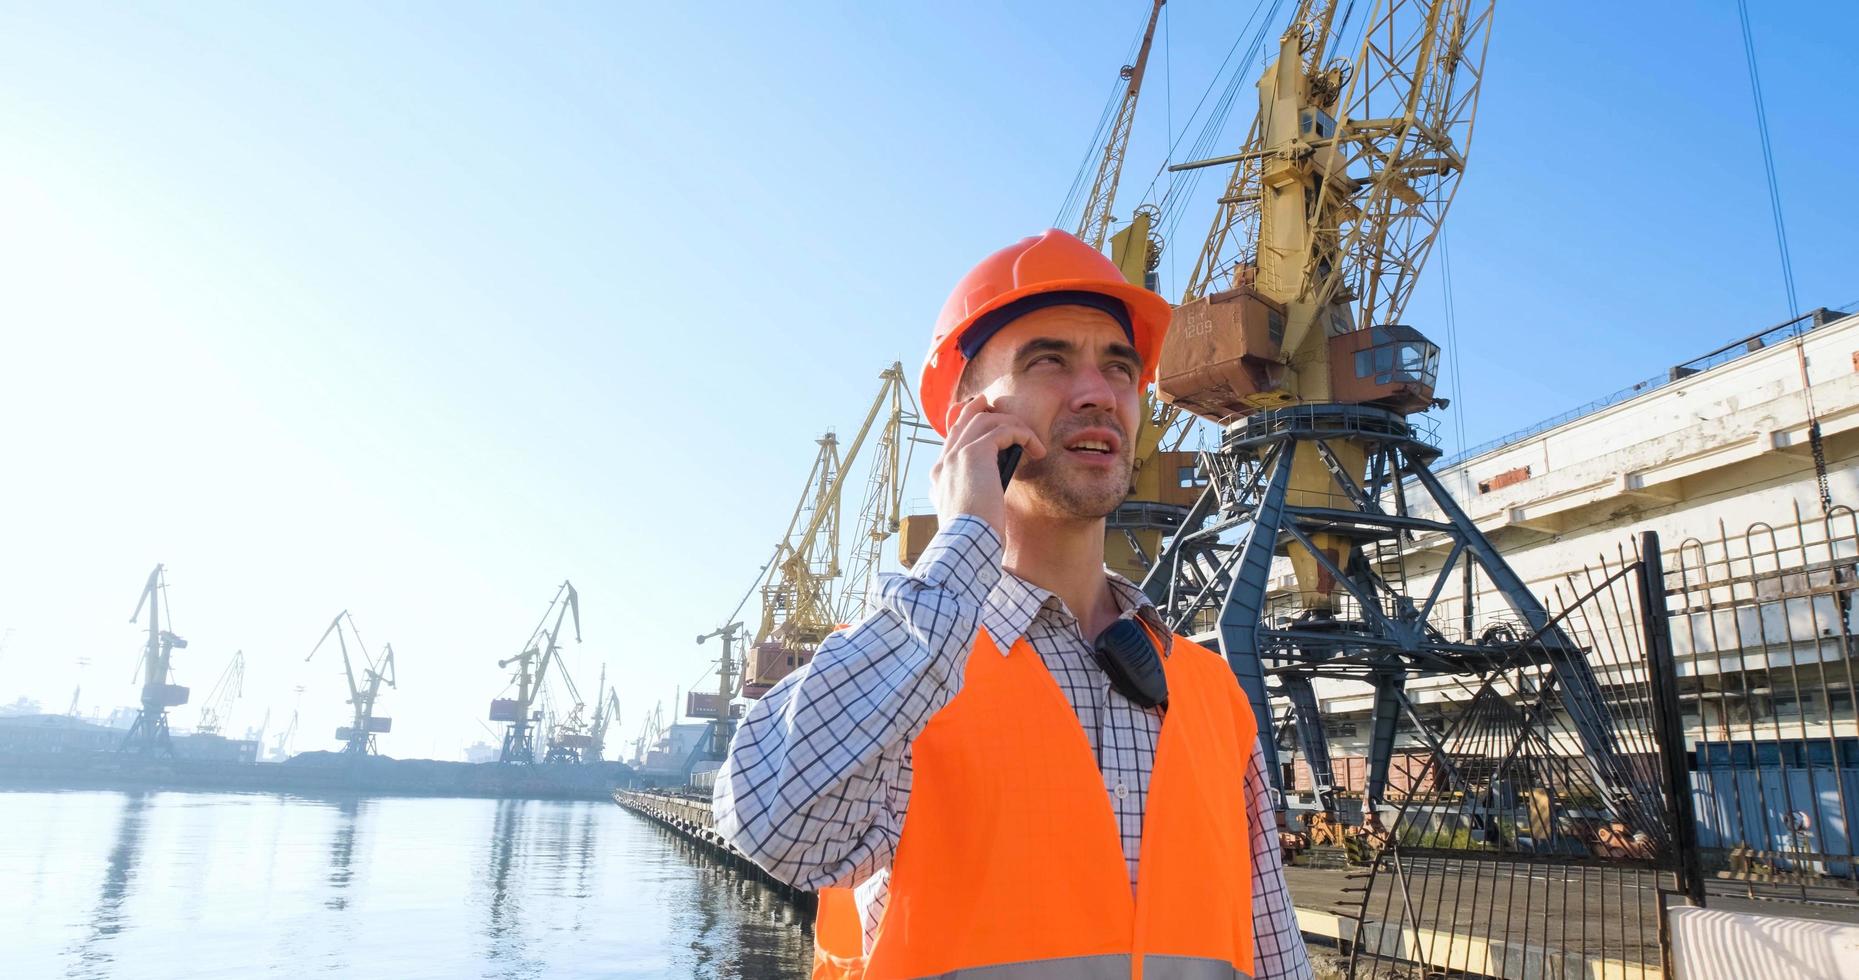 male worker of sea harbor in orange helmet and safety west, cranes and sea background photo